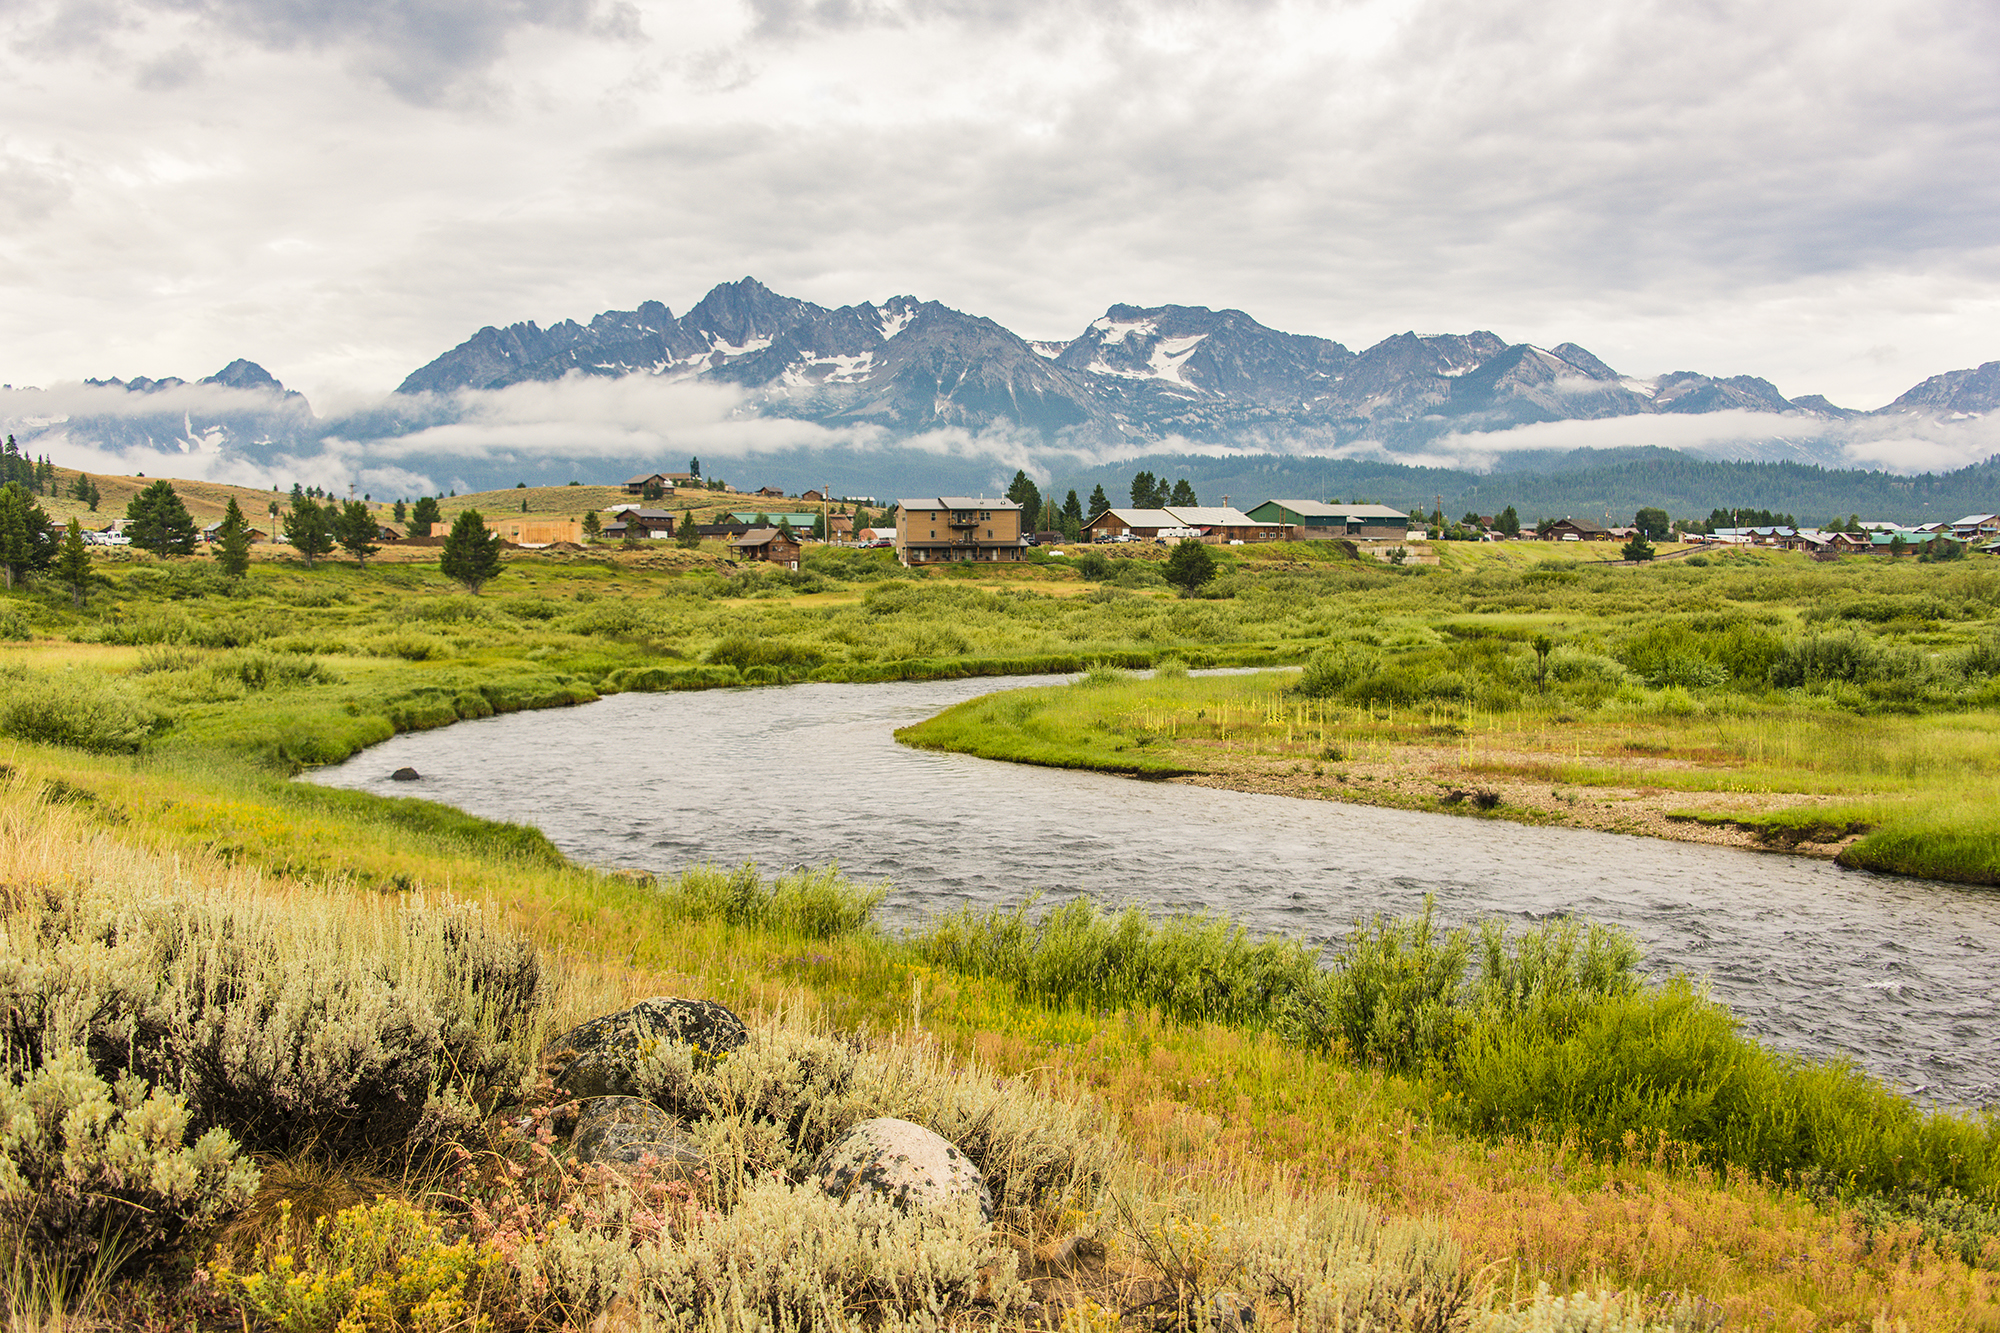 When you arrive in Stanley, views of the Sawtooth Range and Frank Church--River of No Return Wilderness will beckon you to get deeper into nature.